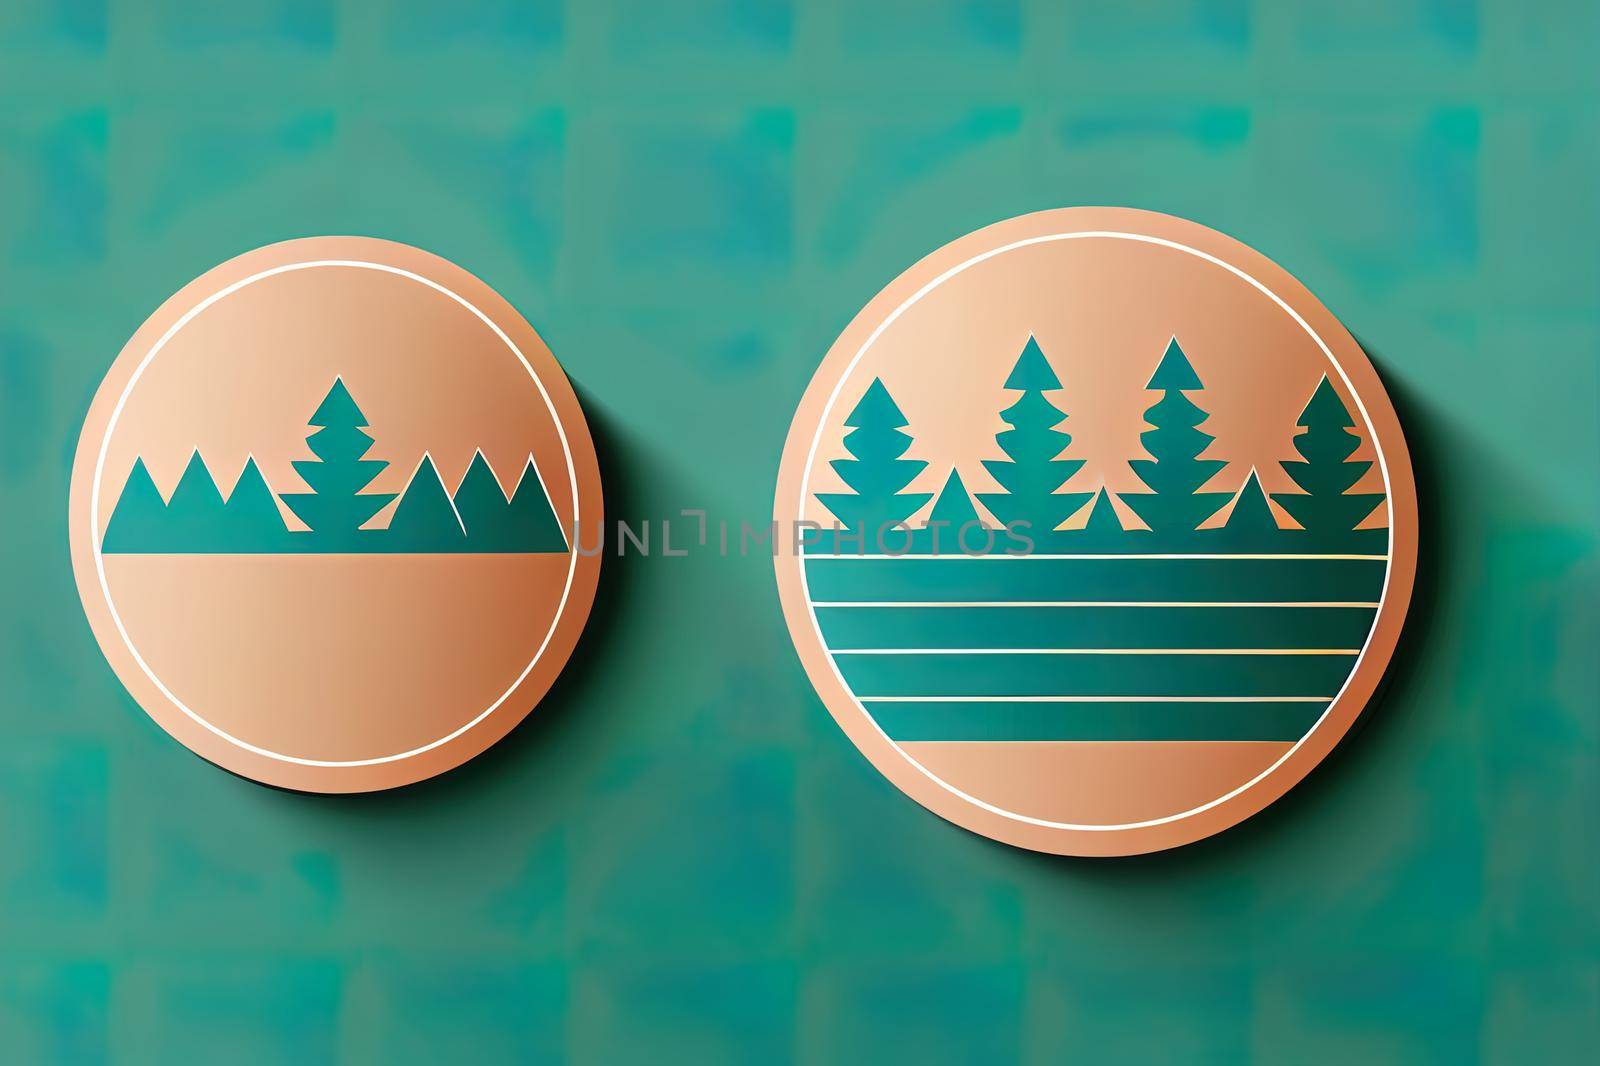 travel badge with pine trees textured illustration and forest adventure inspirational, animal deer animal wolf logo